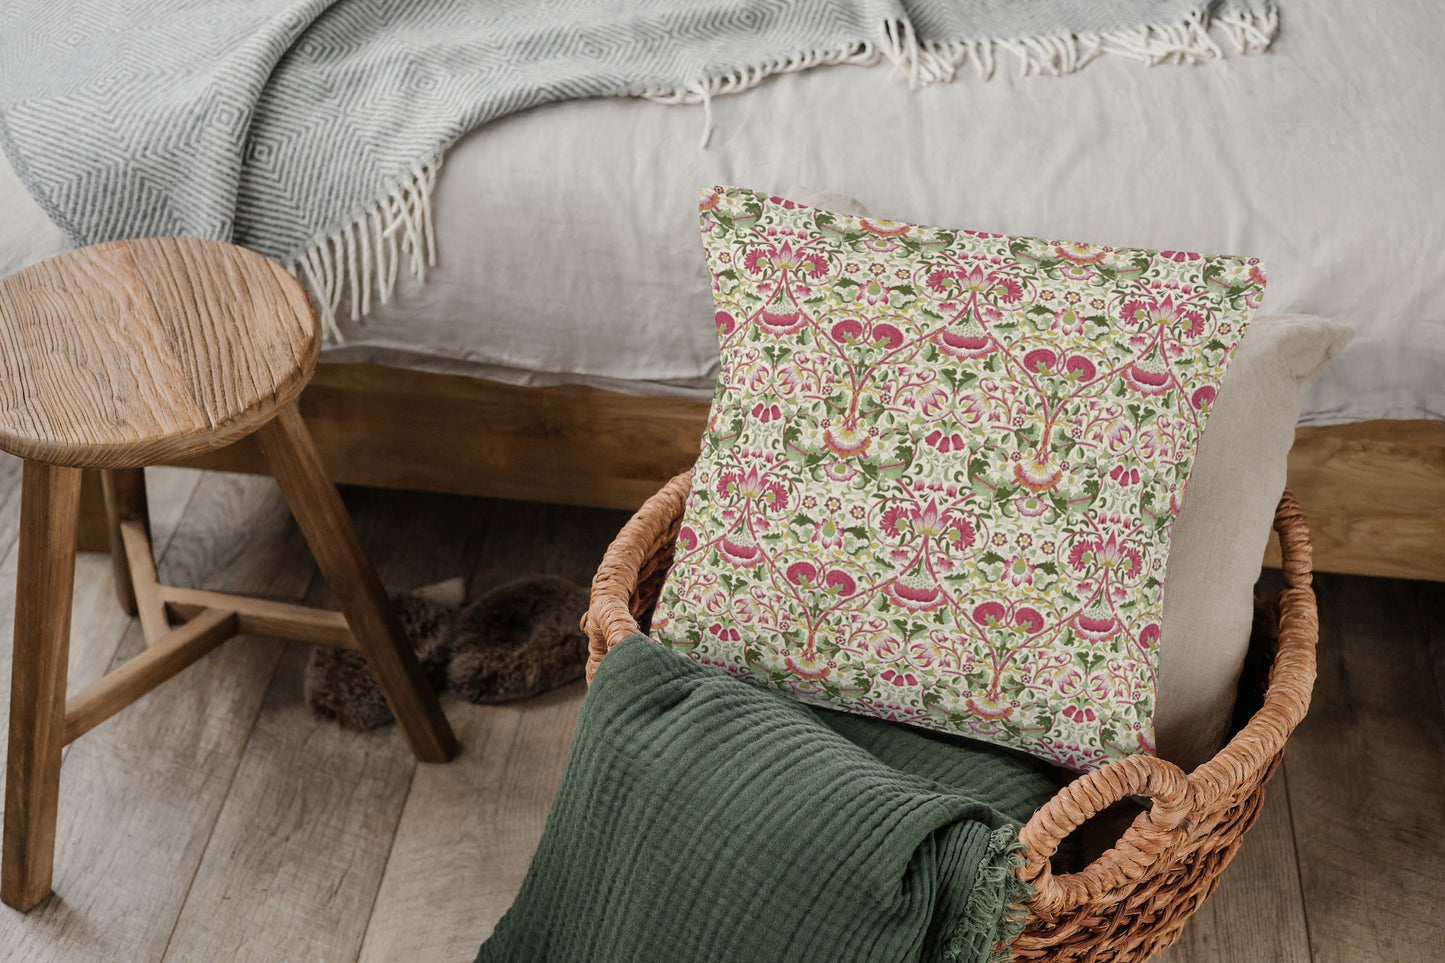 Lodden Outdoor Pillow William Morris Rose Thyme